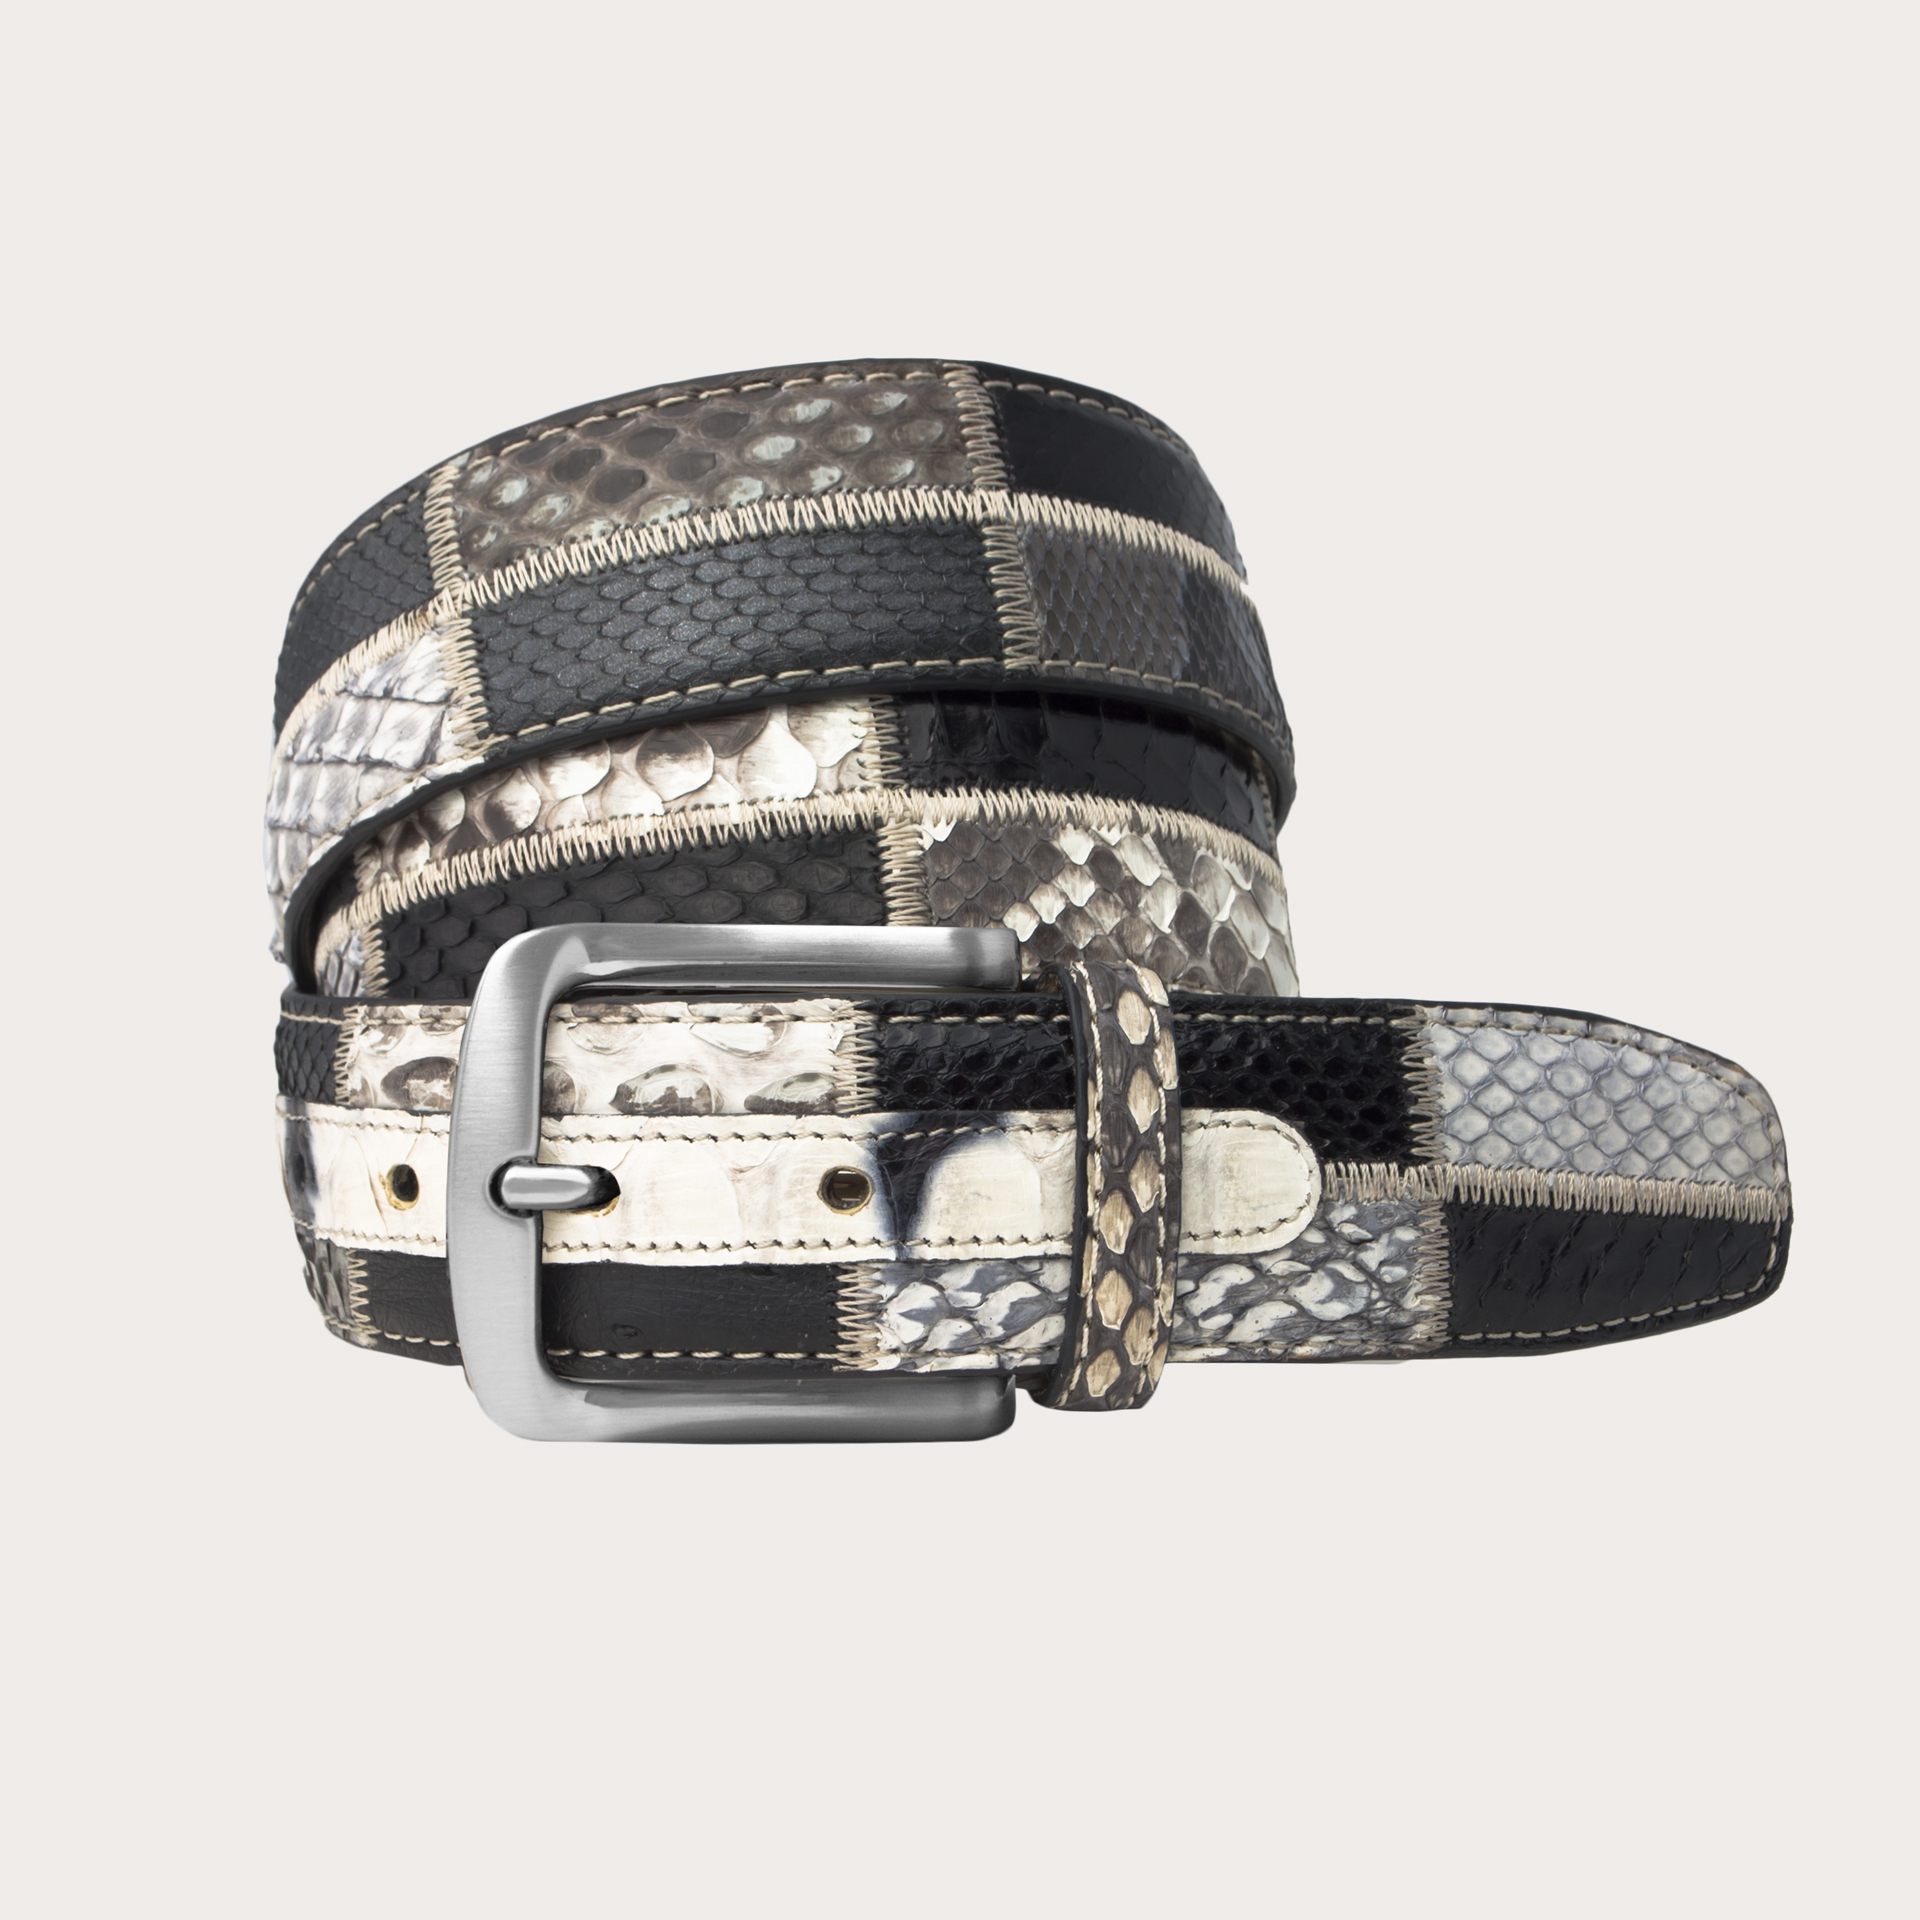 Genuine python belt handmade in Italy with patchwork workmanship. A unique piece that does not go unnoticed.